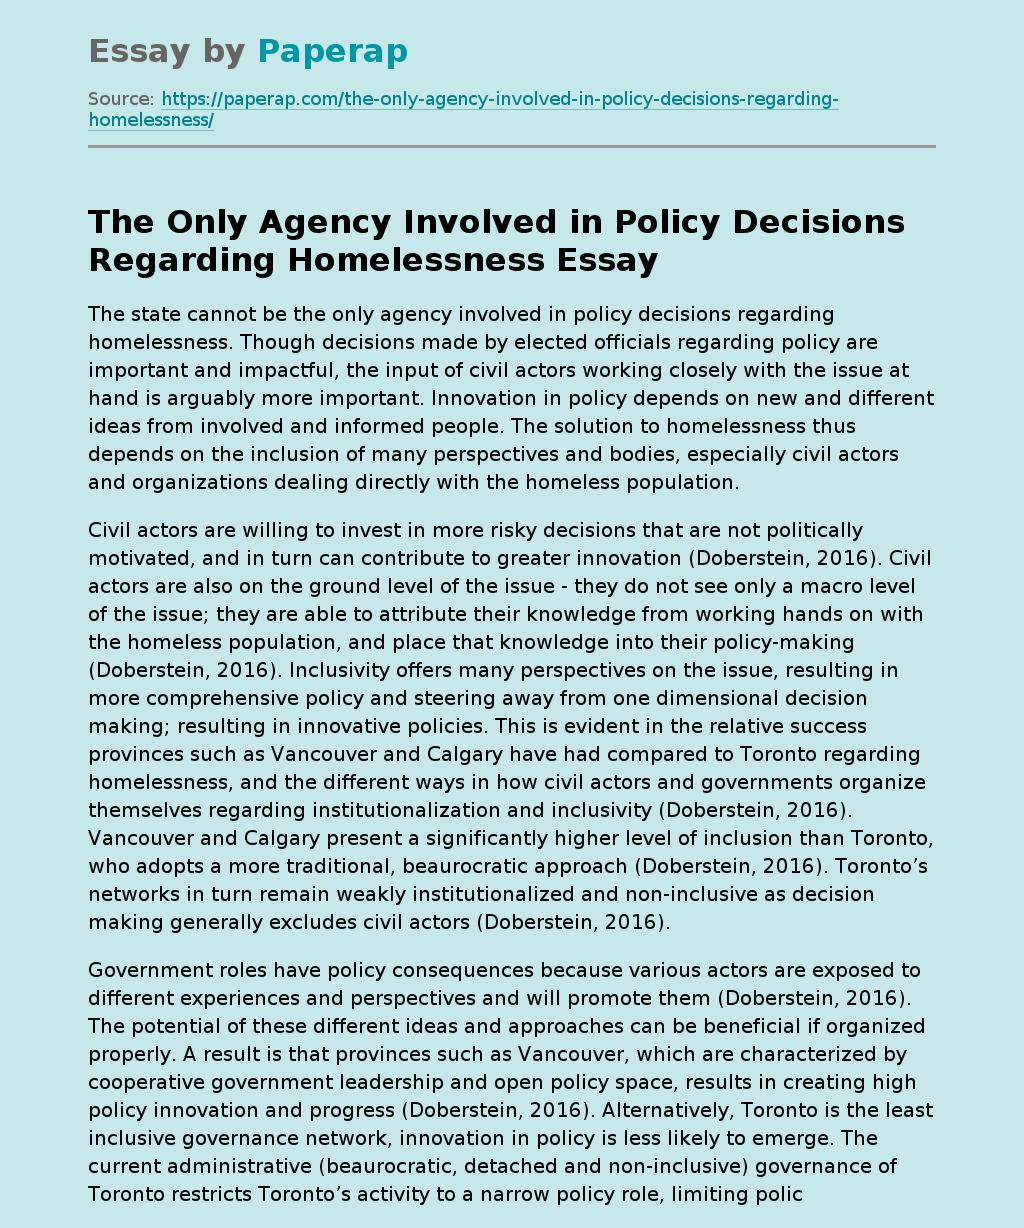 The Only Agency Involved in Policy Decisions Regarding Homelessness